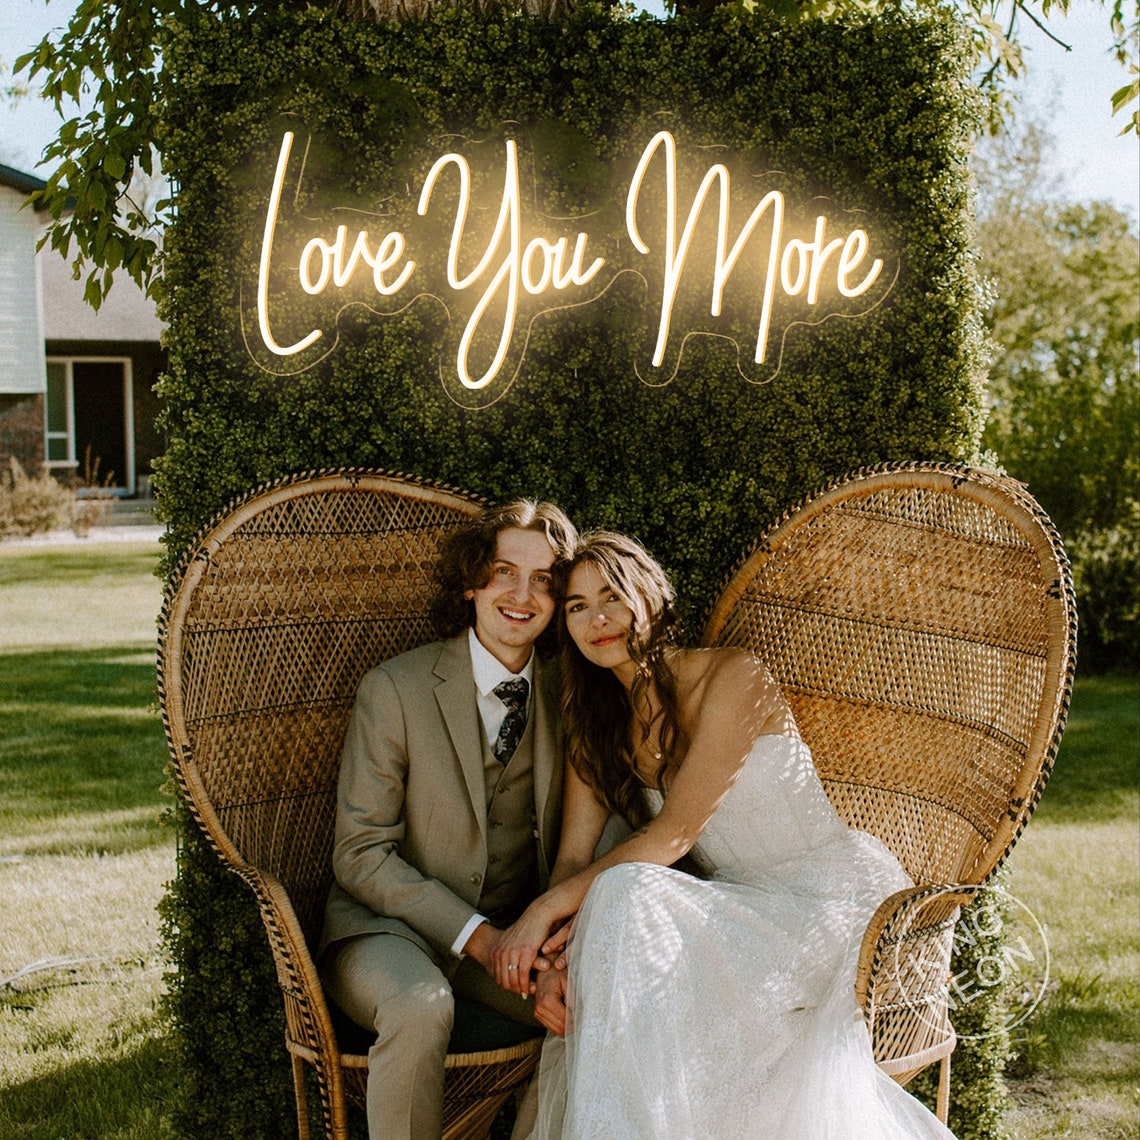 Love You More Neon Wedding Neon Sign Engagement Gift Party image 2